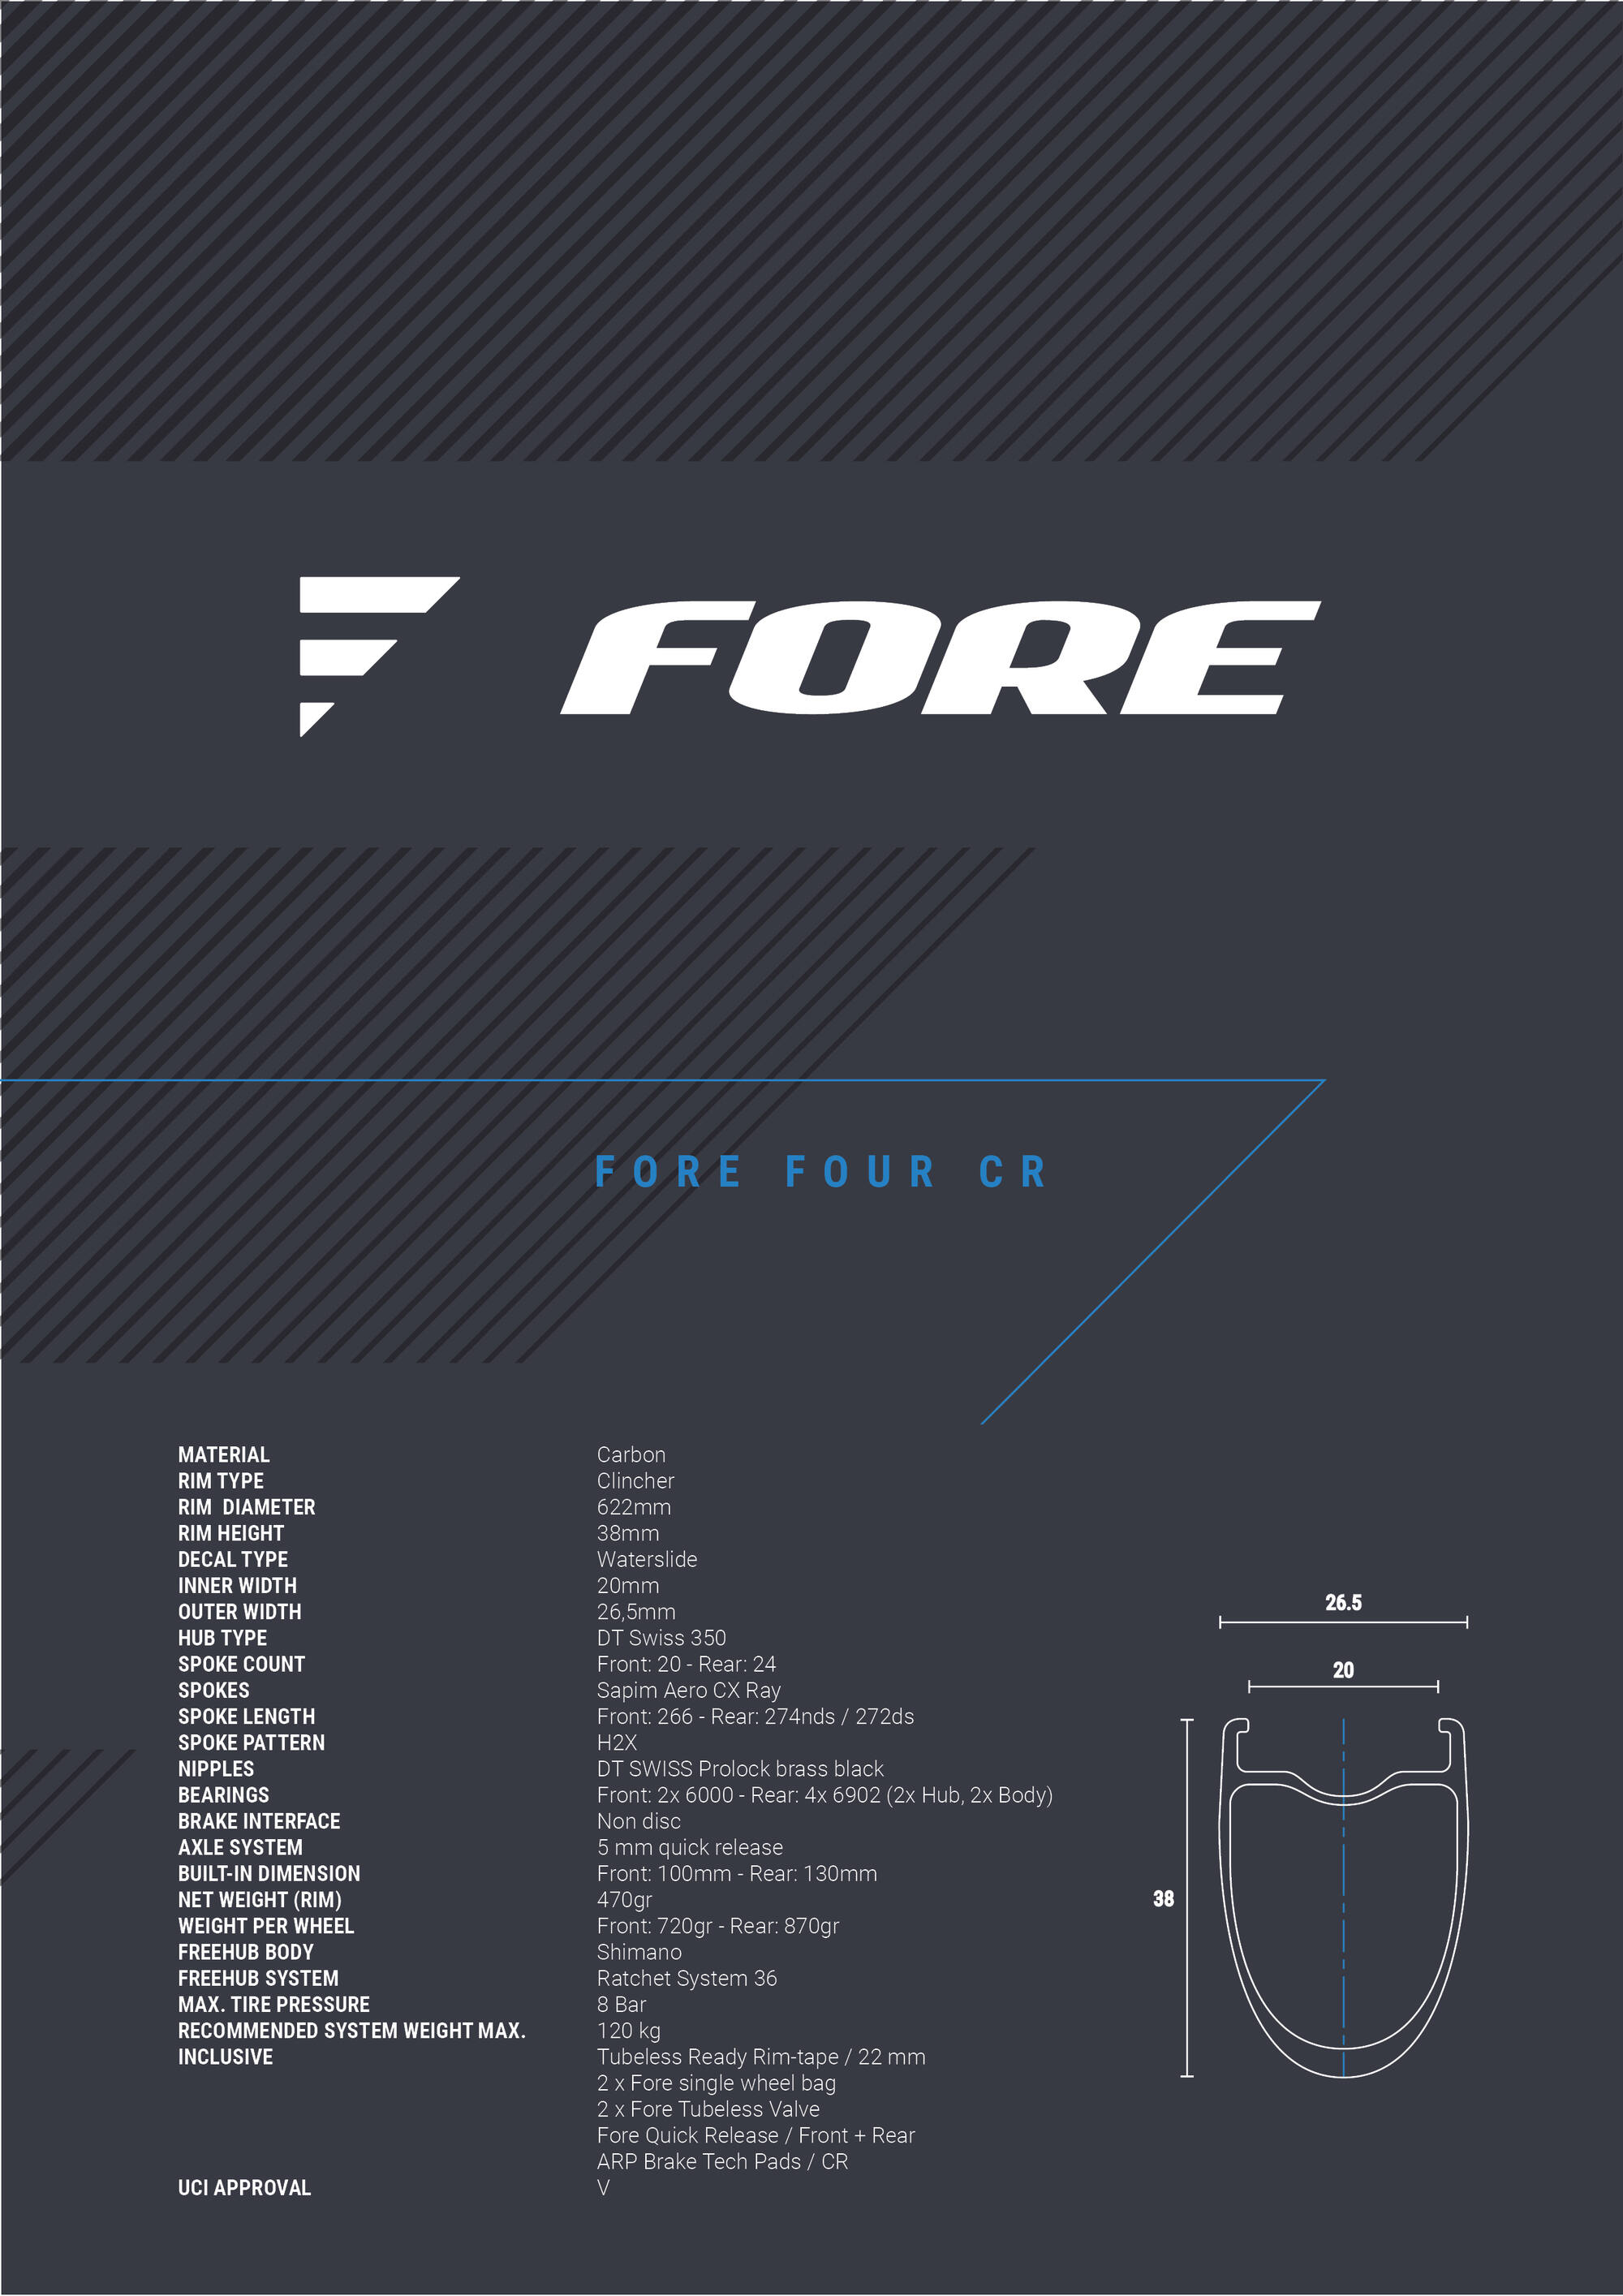 FORE - Four CR